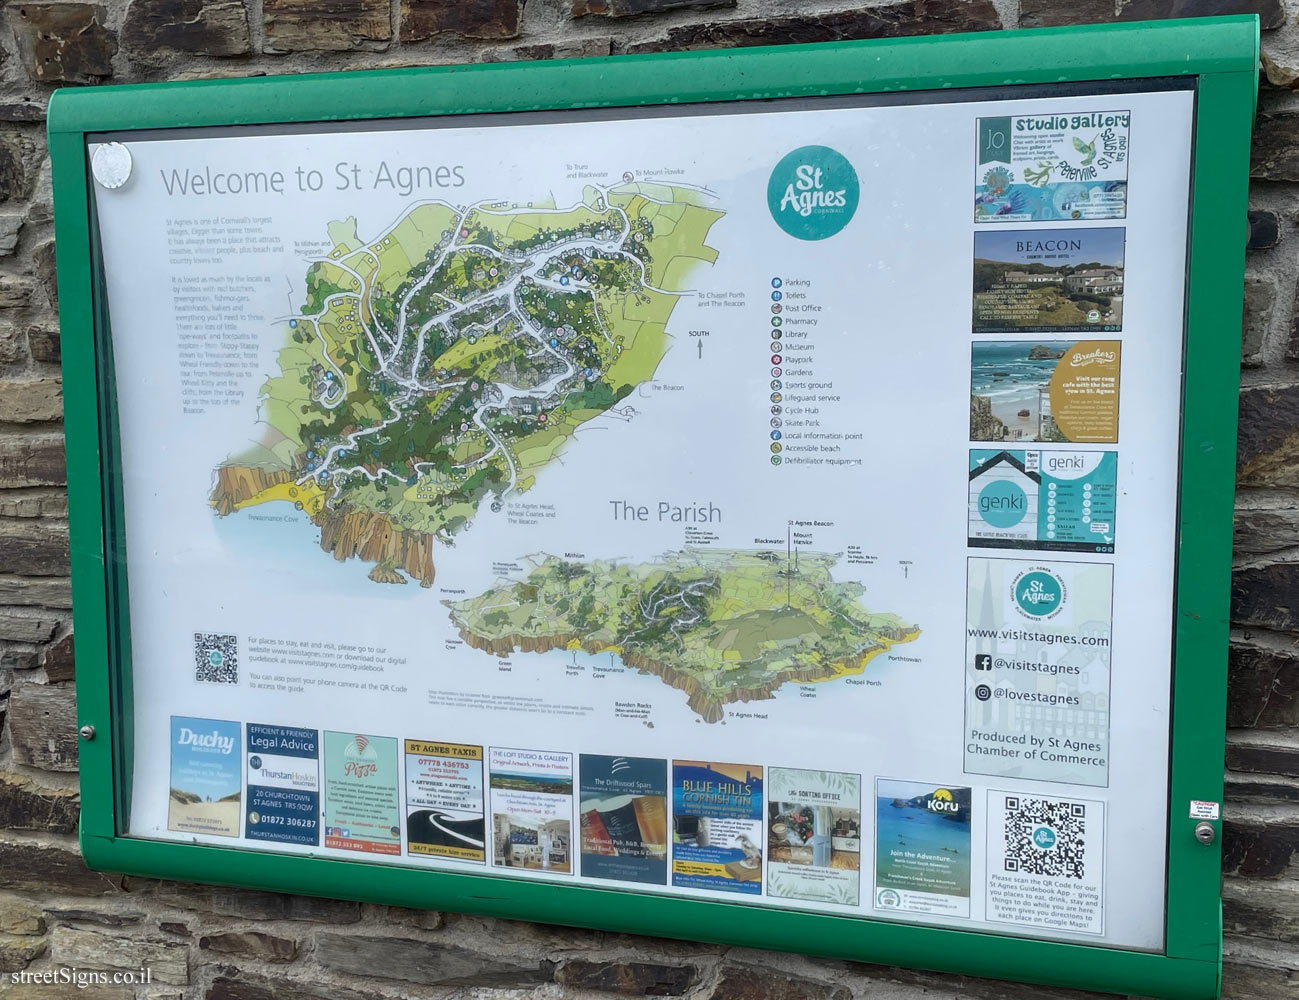 St Agnes - Map of the area